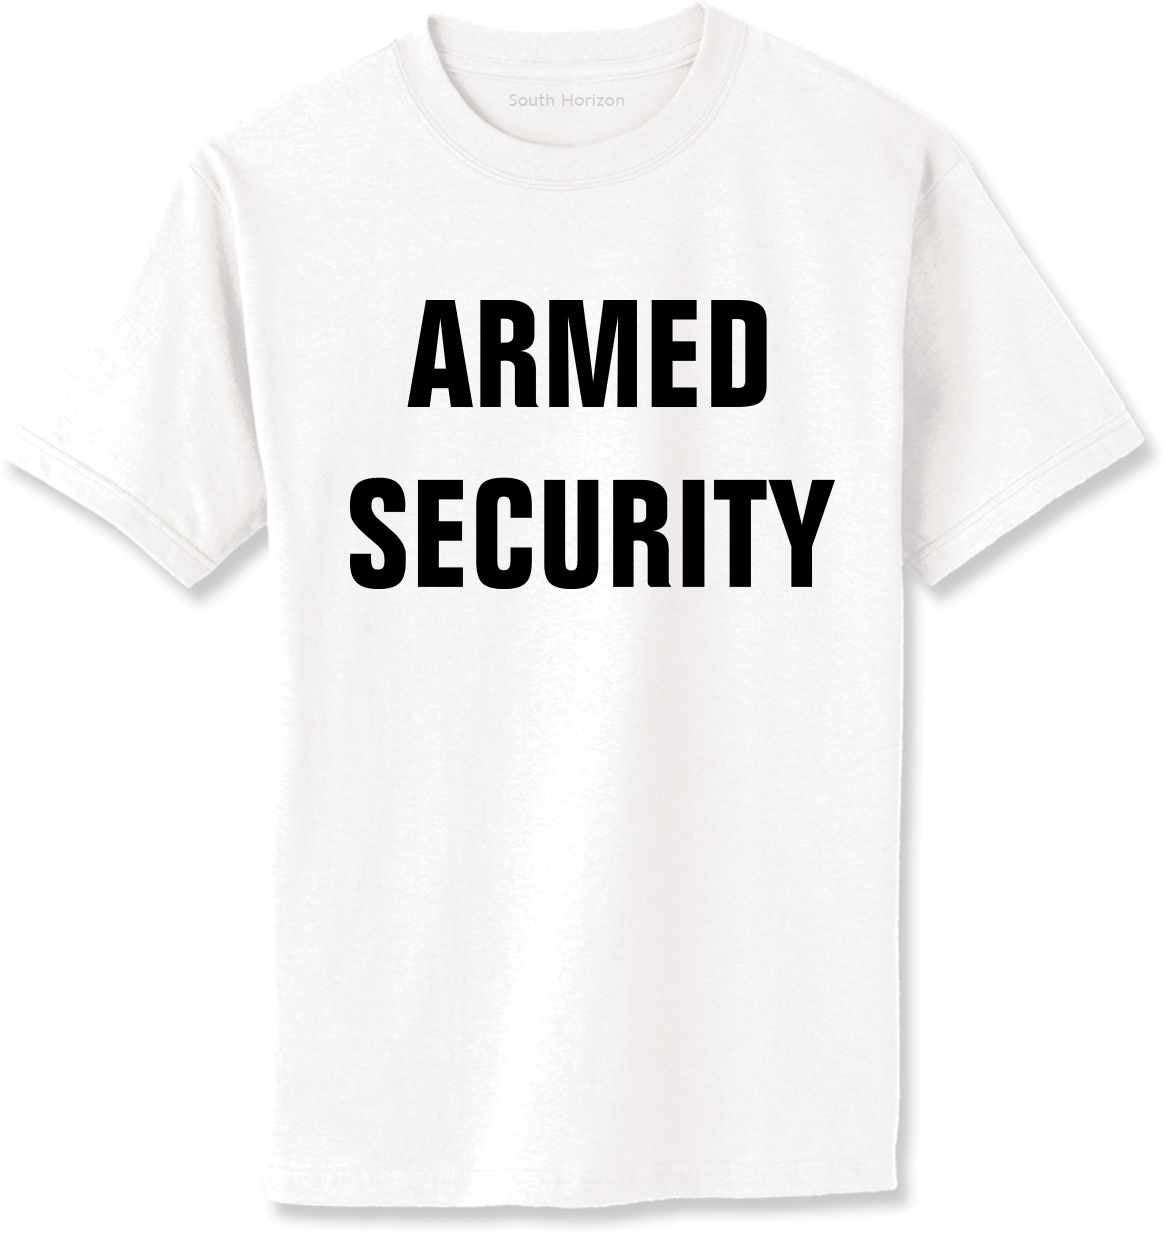 ARMED SECURITY Adult T-Shirt (#405-1)